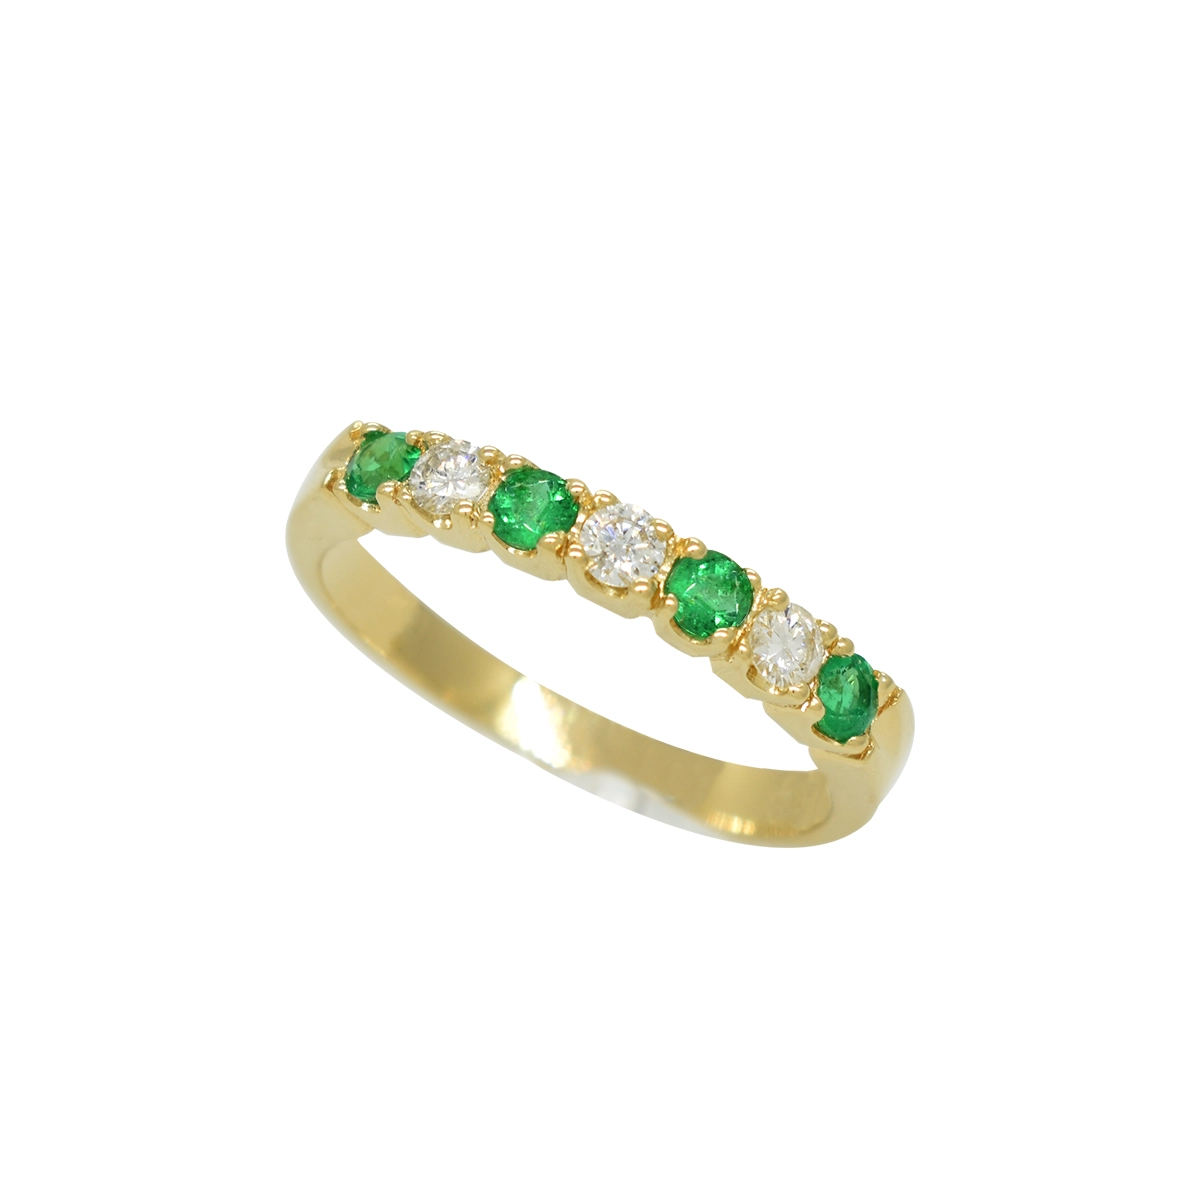 Emerald and Diamond Wedding Band in 18K Gold Classic Prong Setting